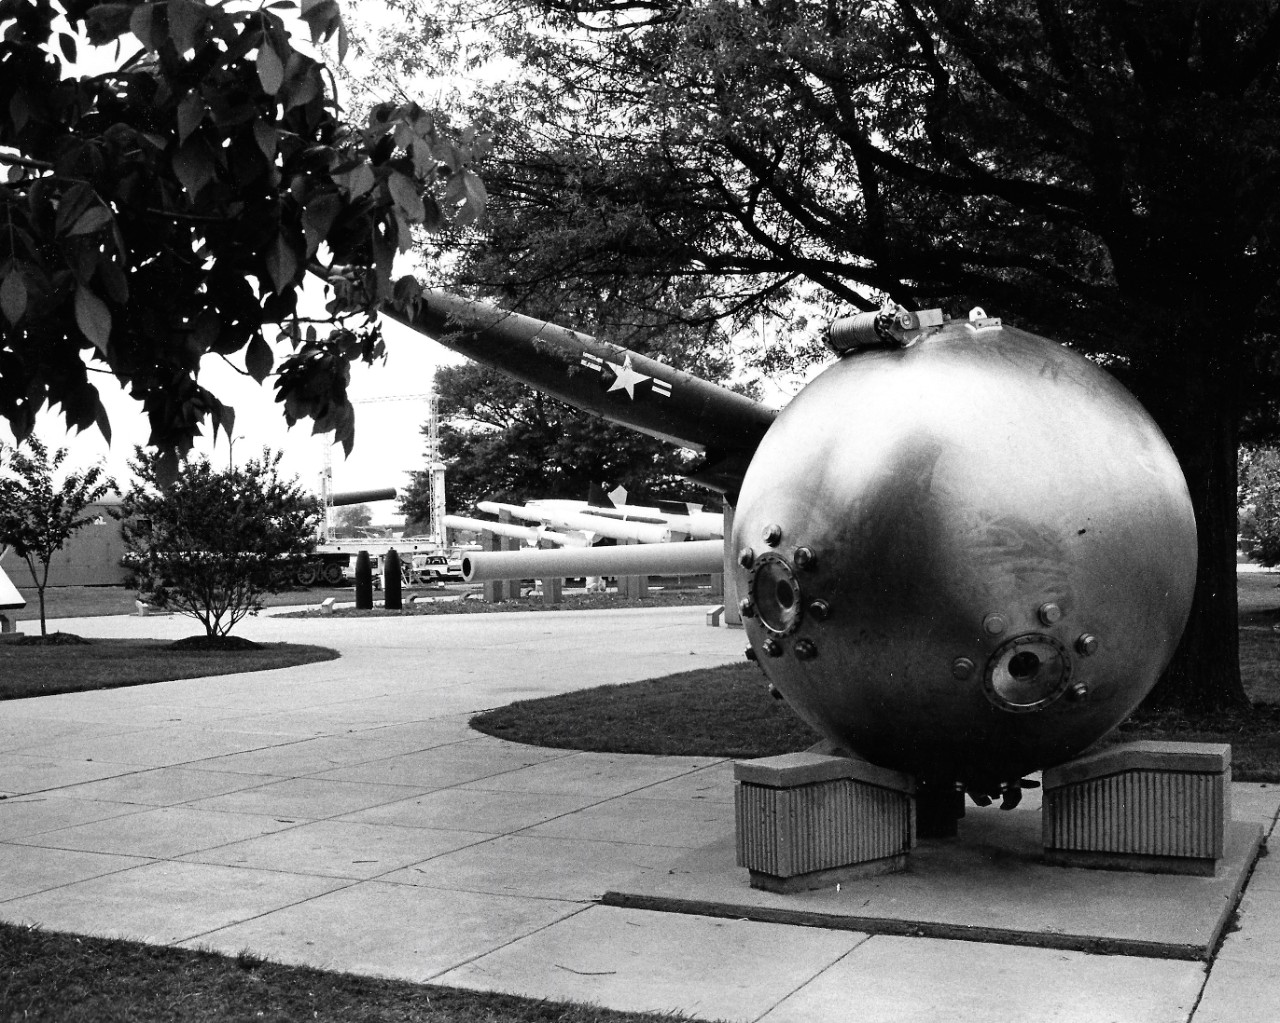 NMUSN-156:  Willard Park, Washington Navy Yard, Washington, D.C. 1970s.   View looking south.   Alvin sphere is in the front center right, with the Regulus II missile behind.   National Museum of the U.S. Navy Photograph Collection.  